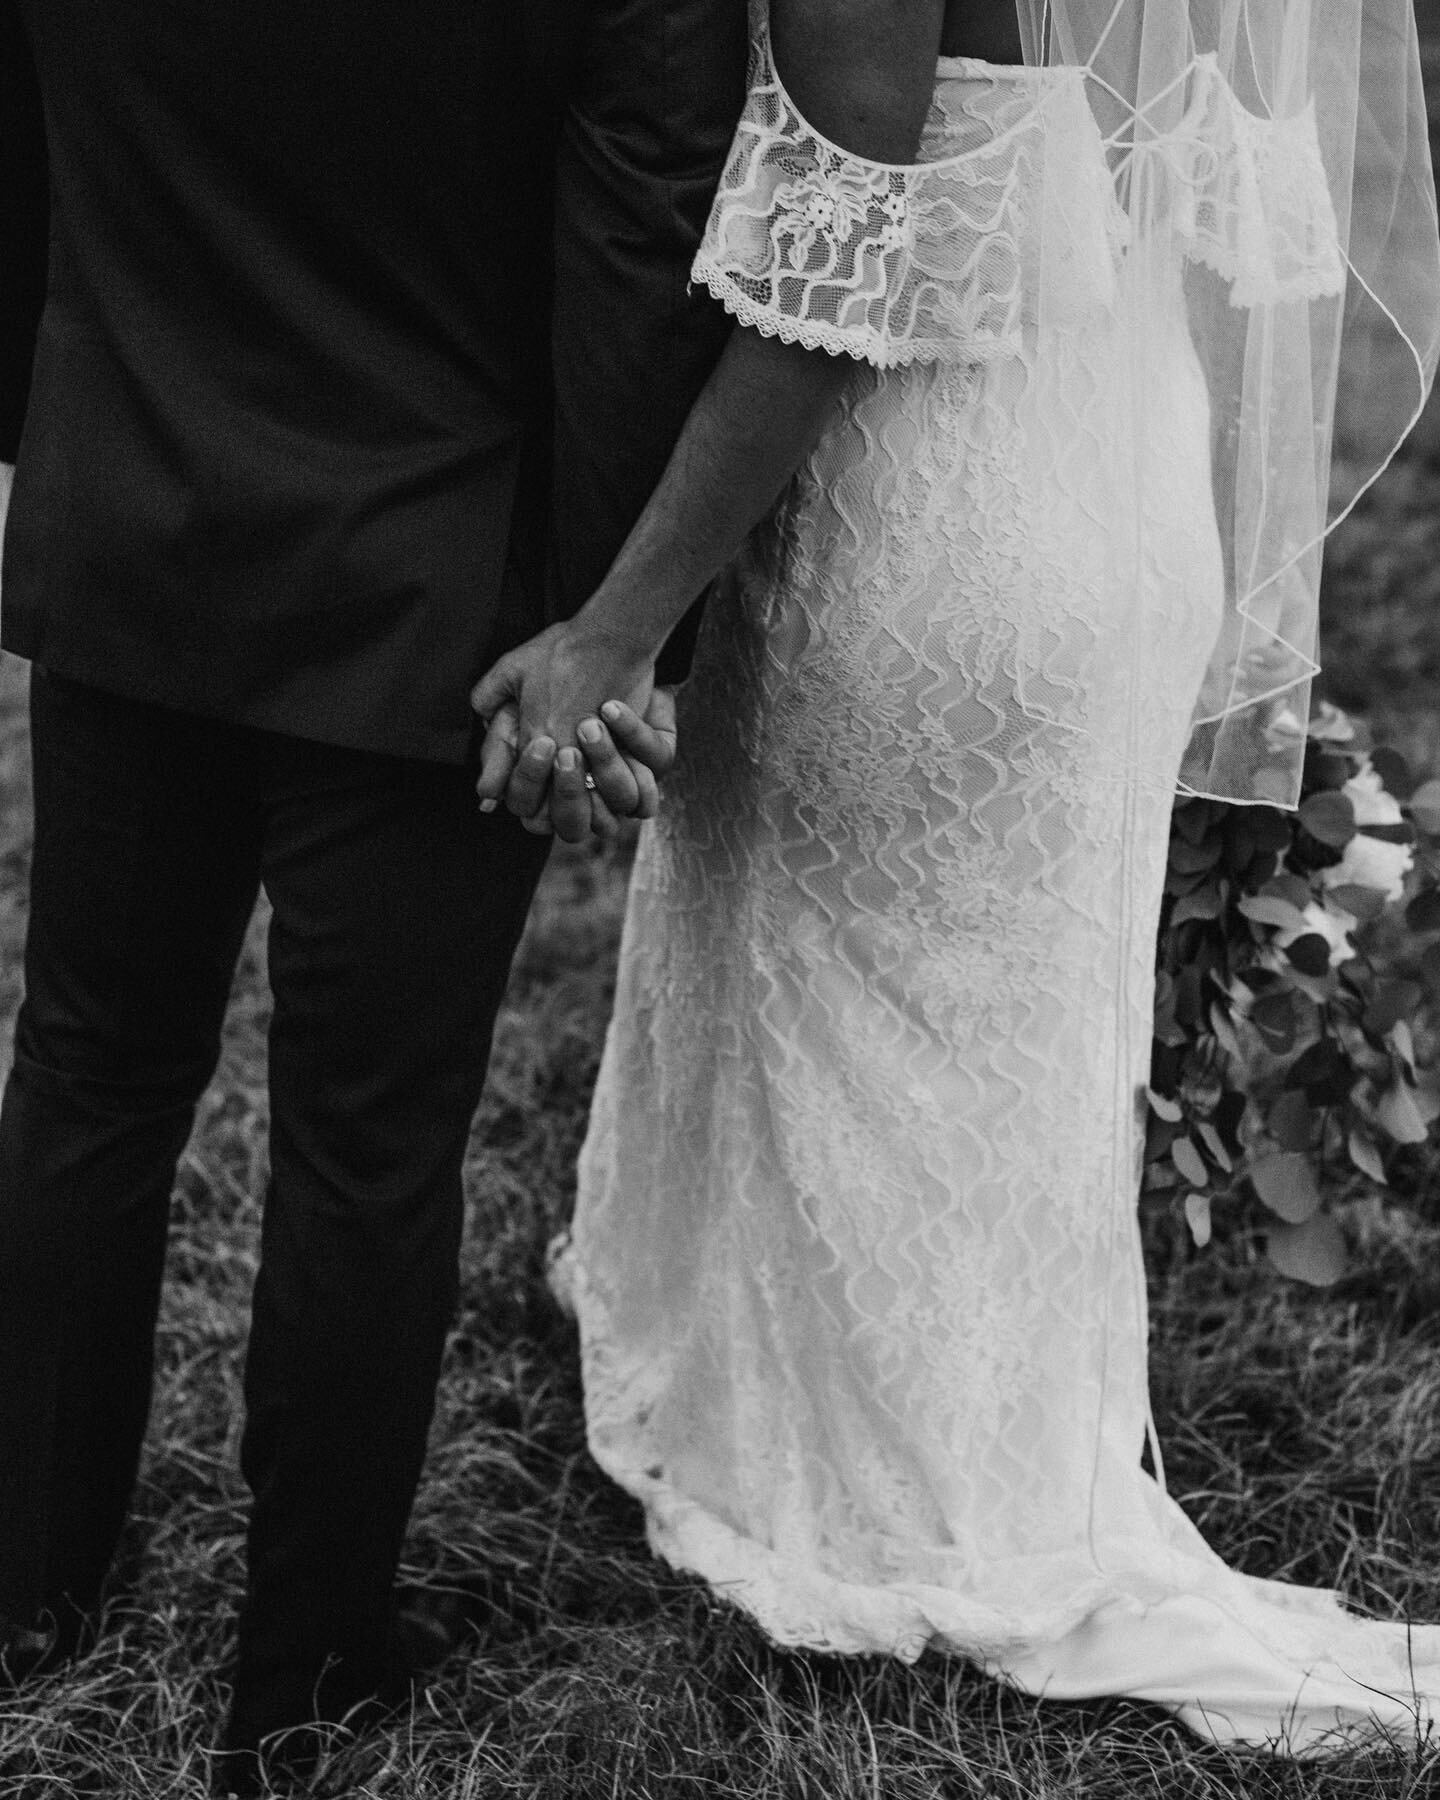 Every time I shoot a wedding, I just feel so honored and trusted that I&rsquo;m there for one of the most important days of someone&rsquo;s life. I could just tell how much these two loved each other 🖤